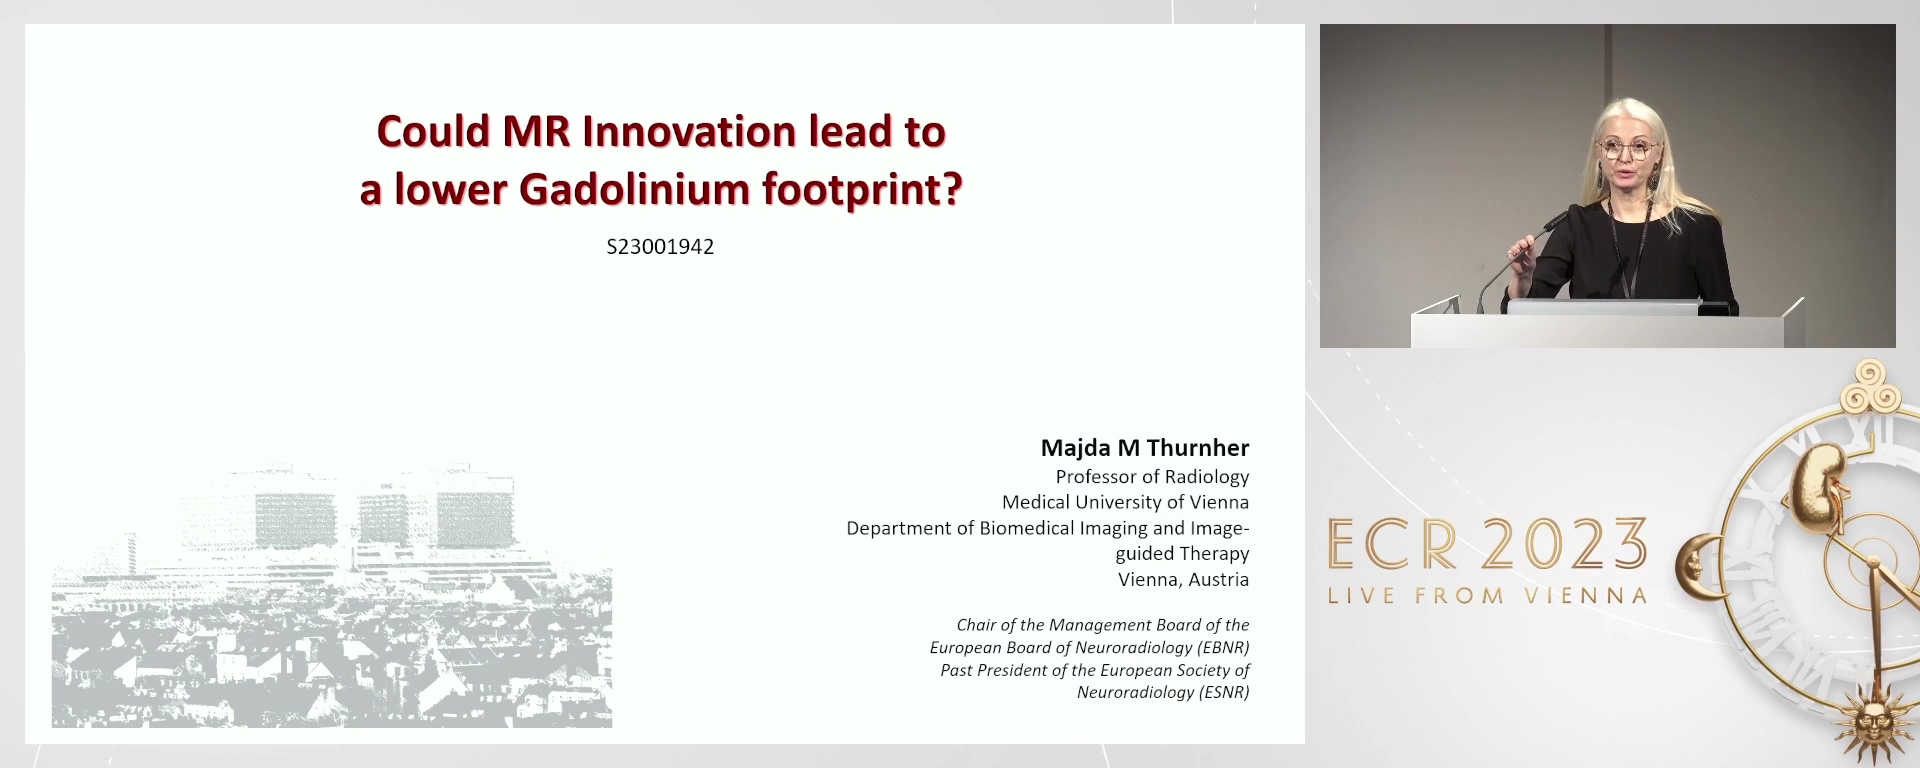 Could MR Innovation lead to a lower Gd footprint?